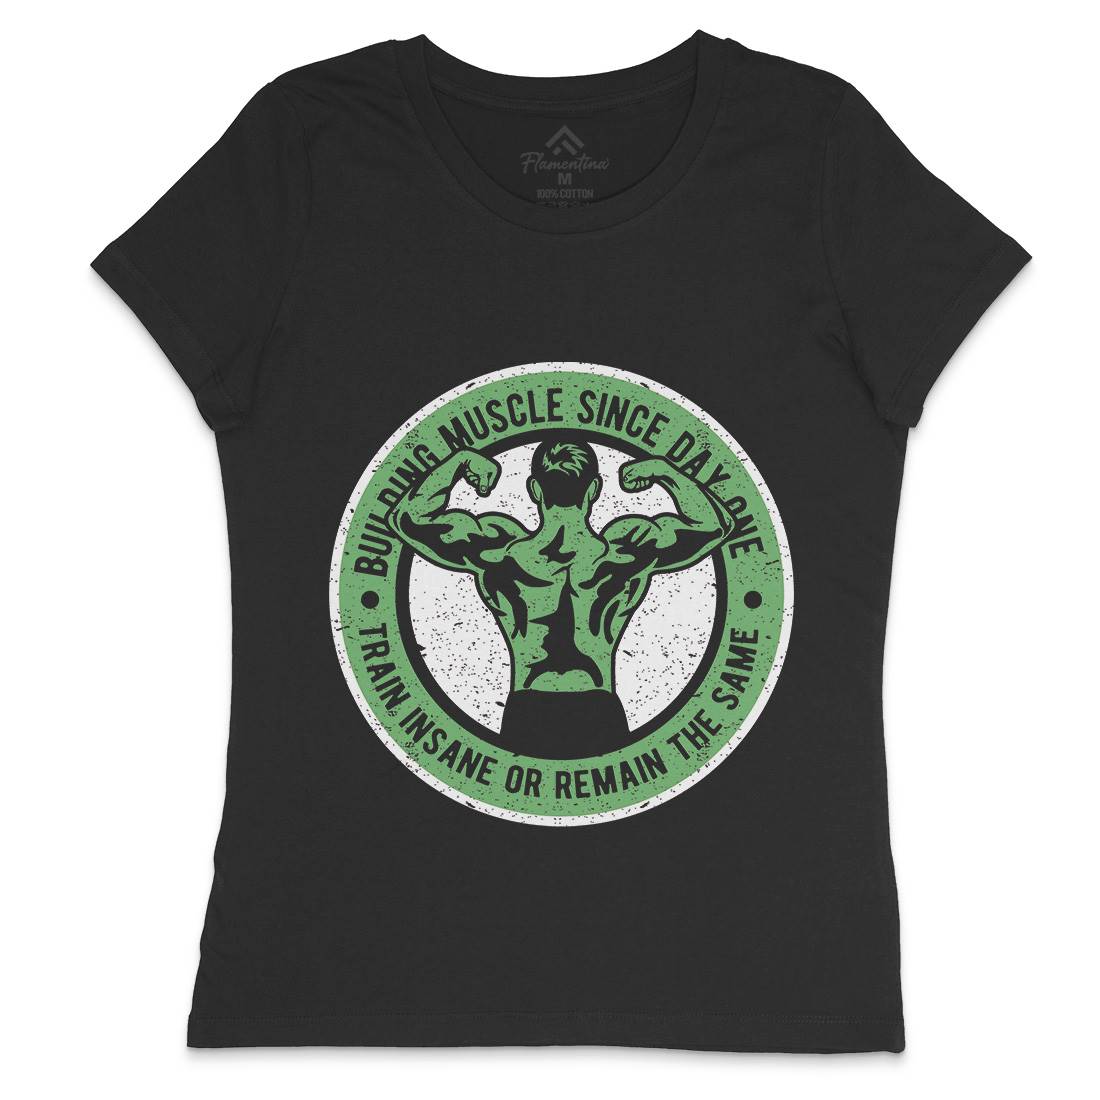 Building Muscle Womens Crew Neck T-Shirt Gym A022